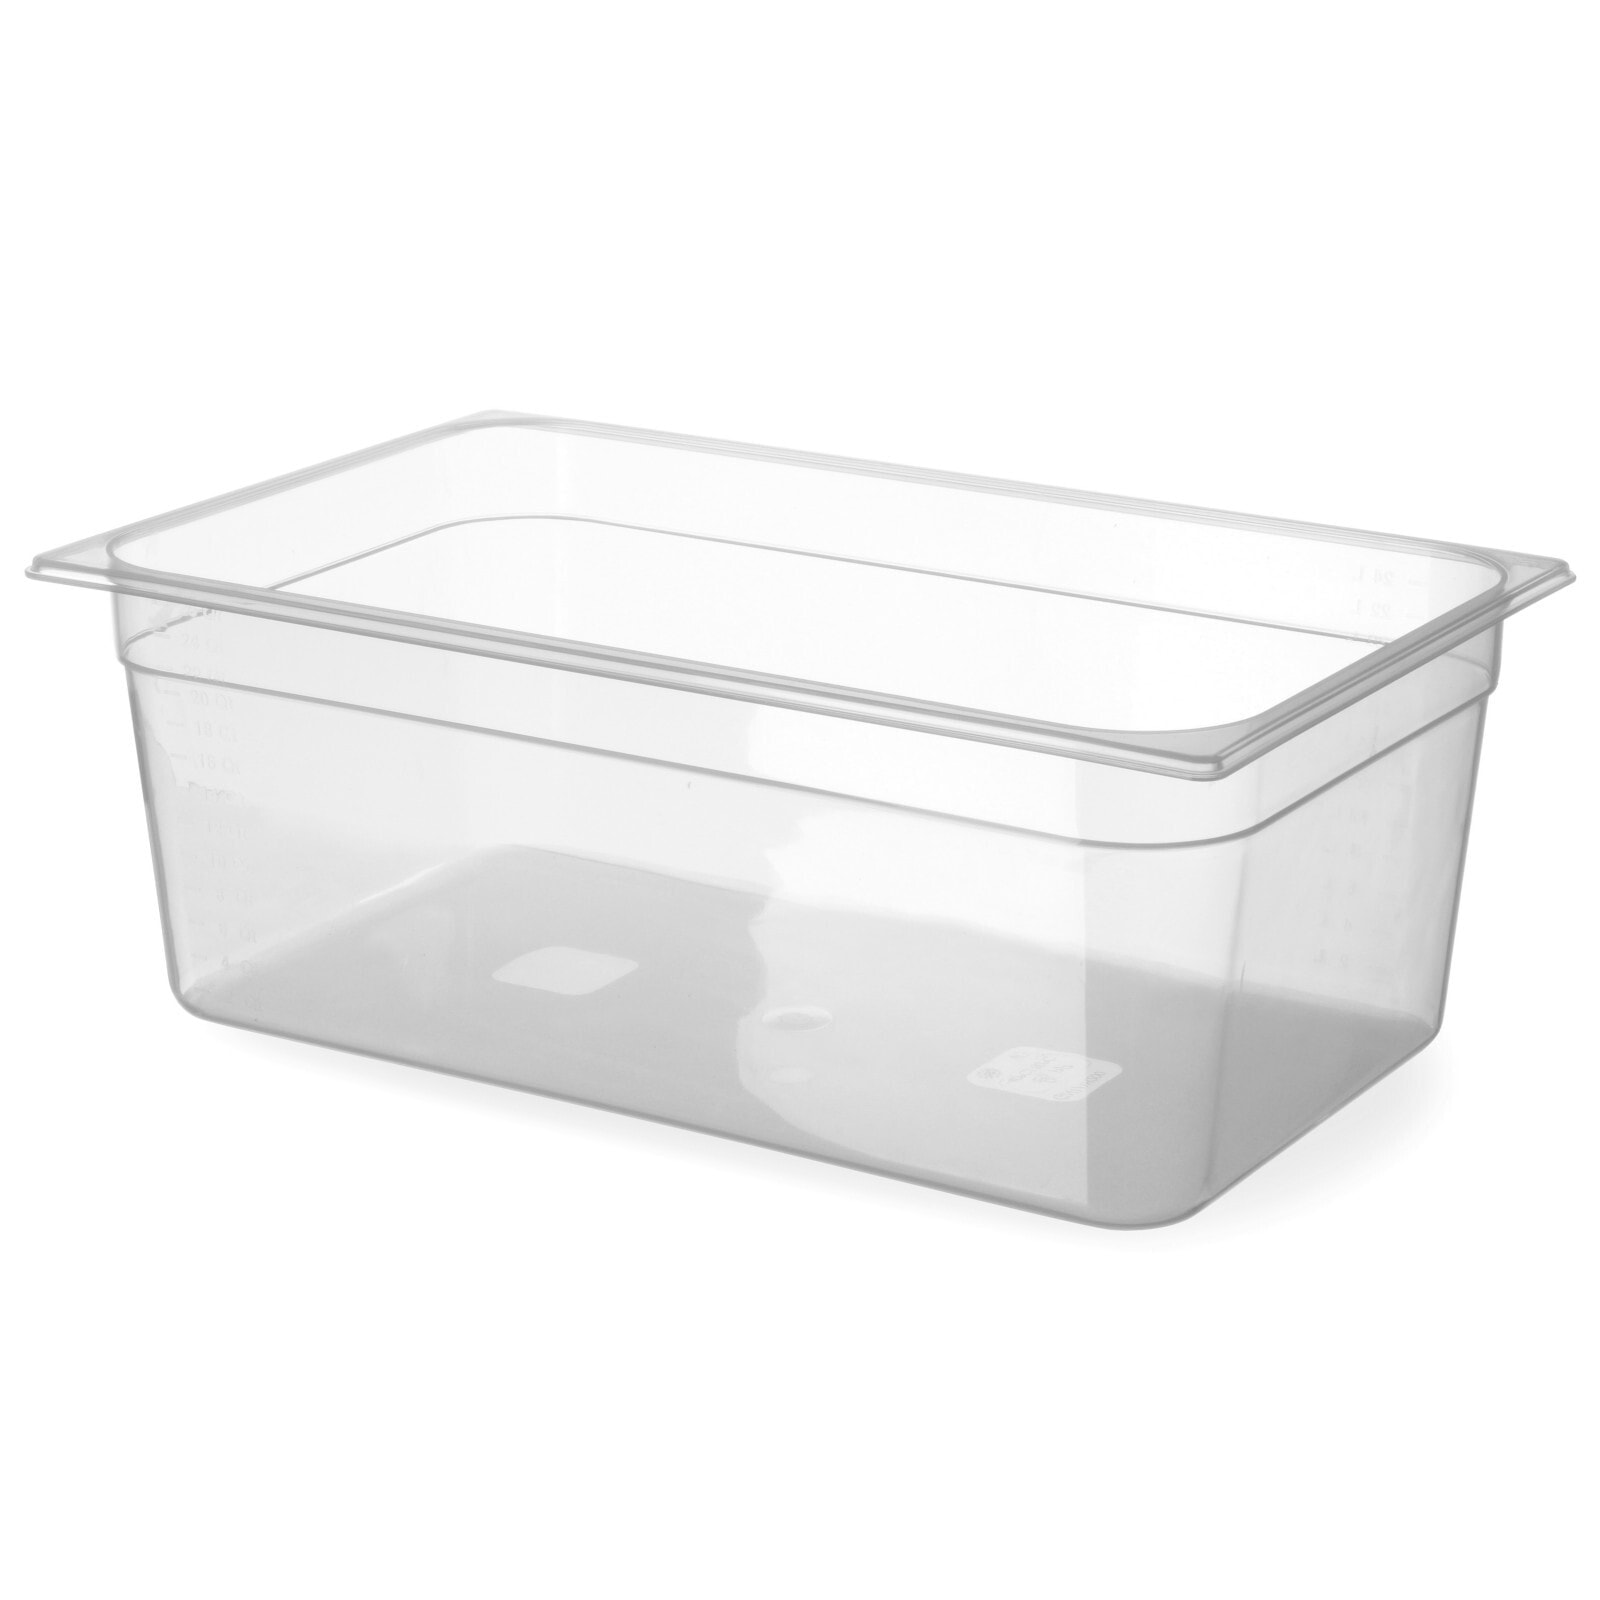 Gastronomy container made of polypropylene GN 1/1, height 200 mm - Hendi 880005